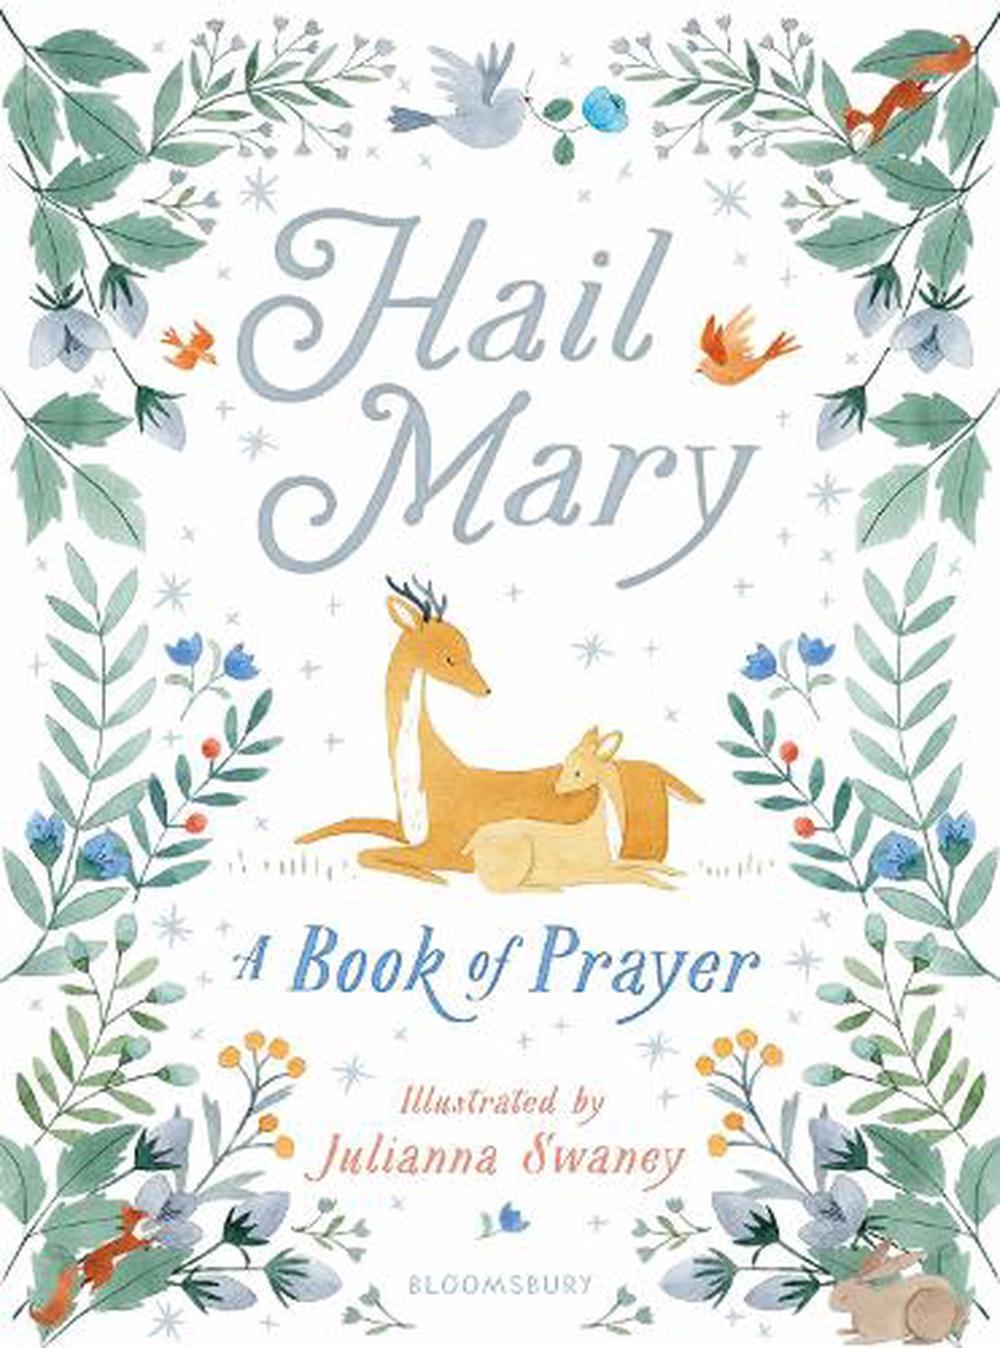 hail mary book review